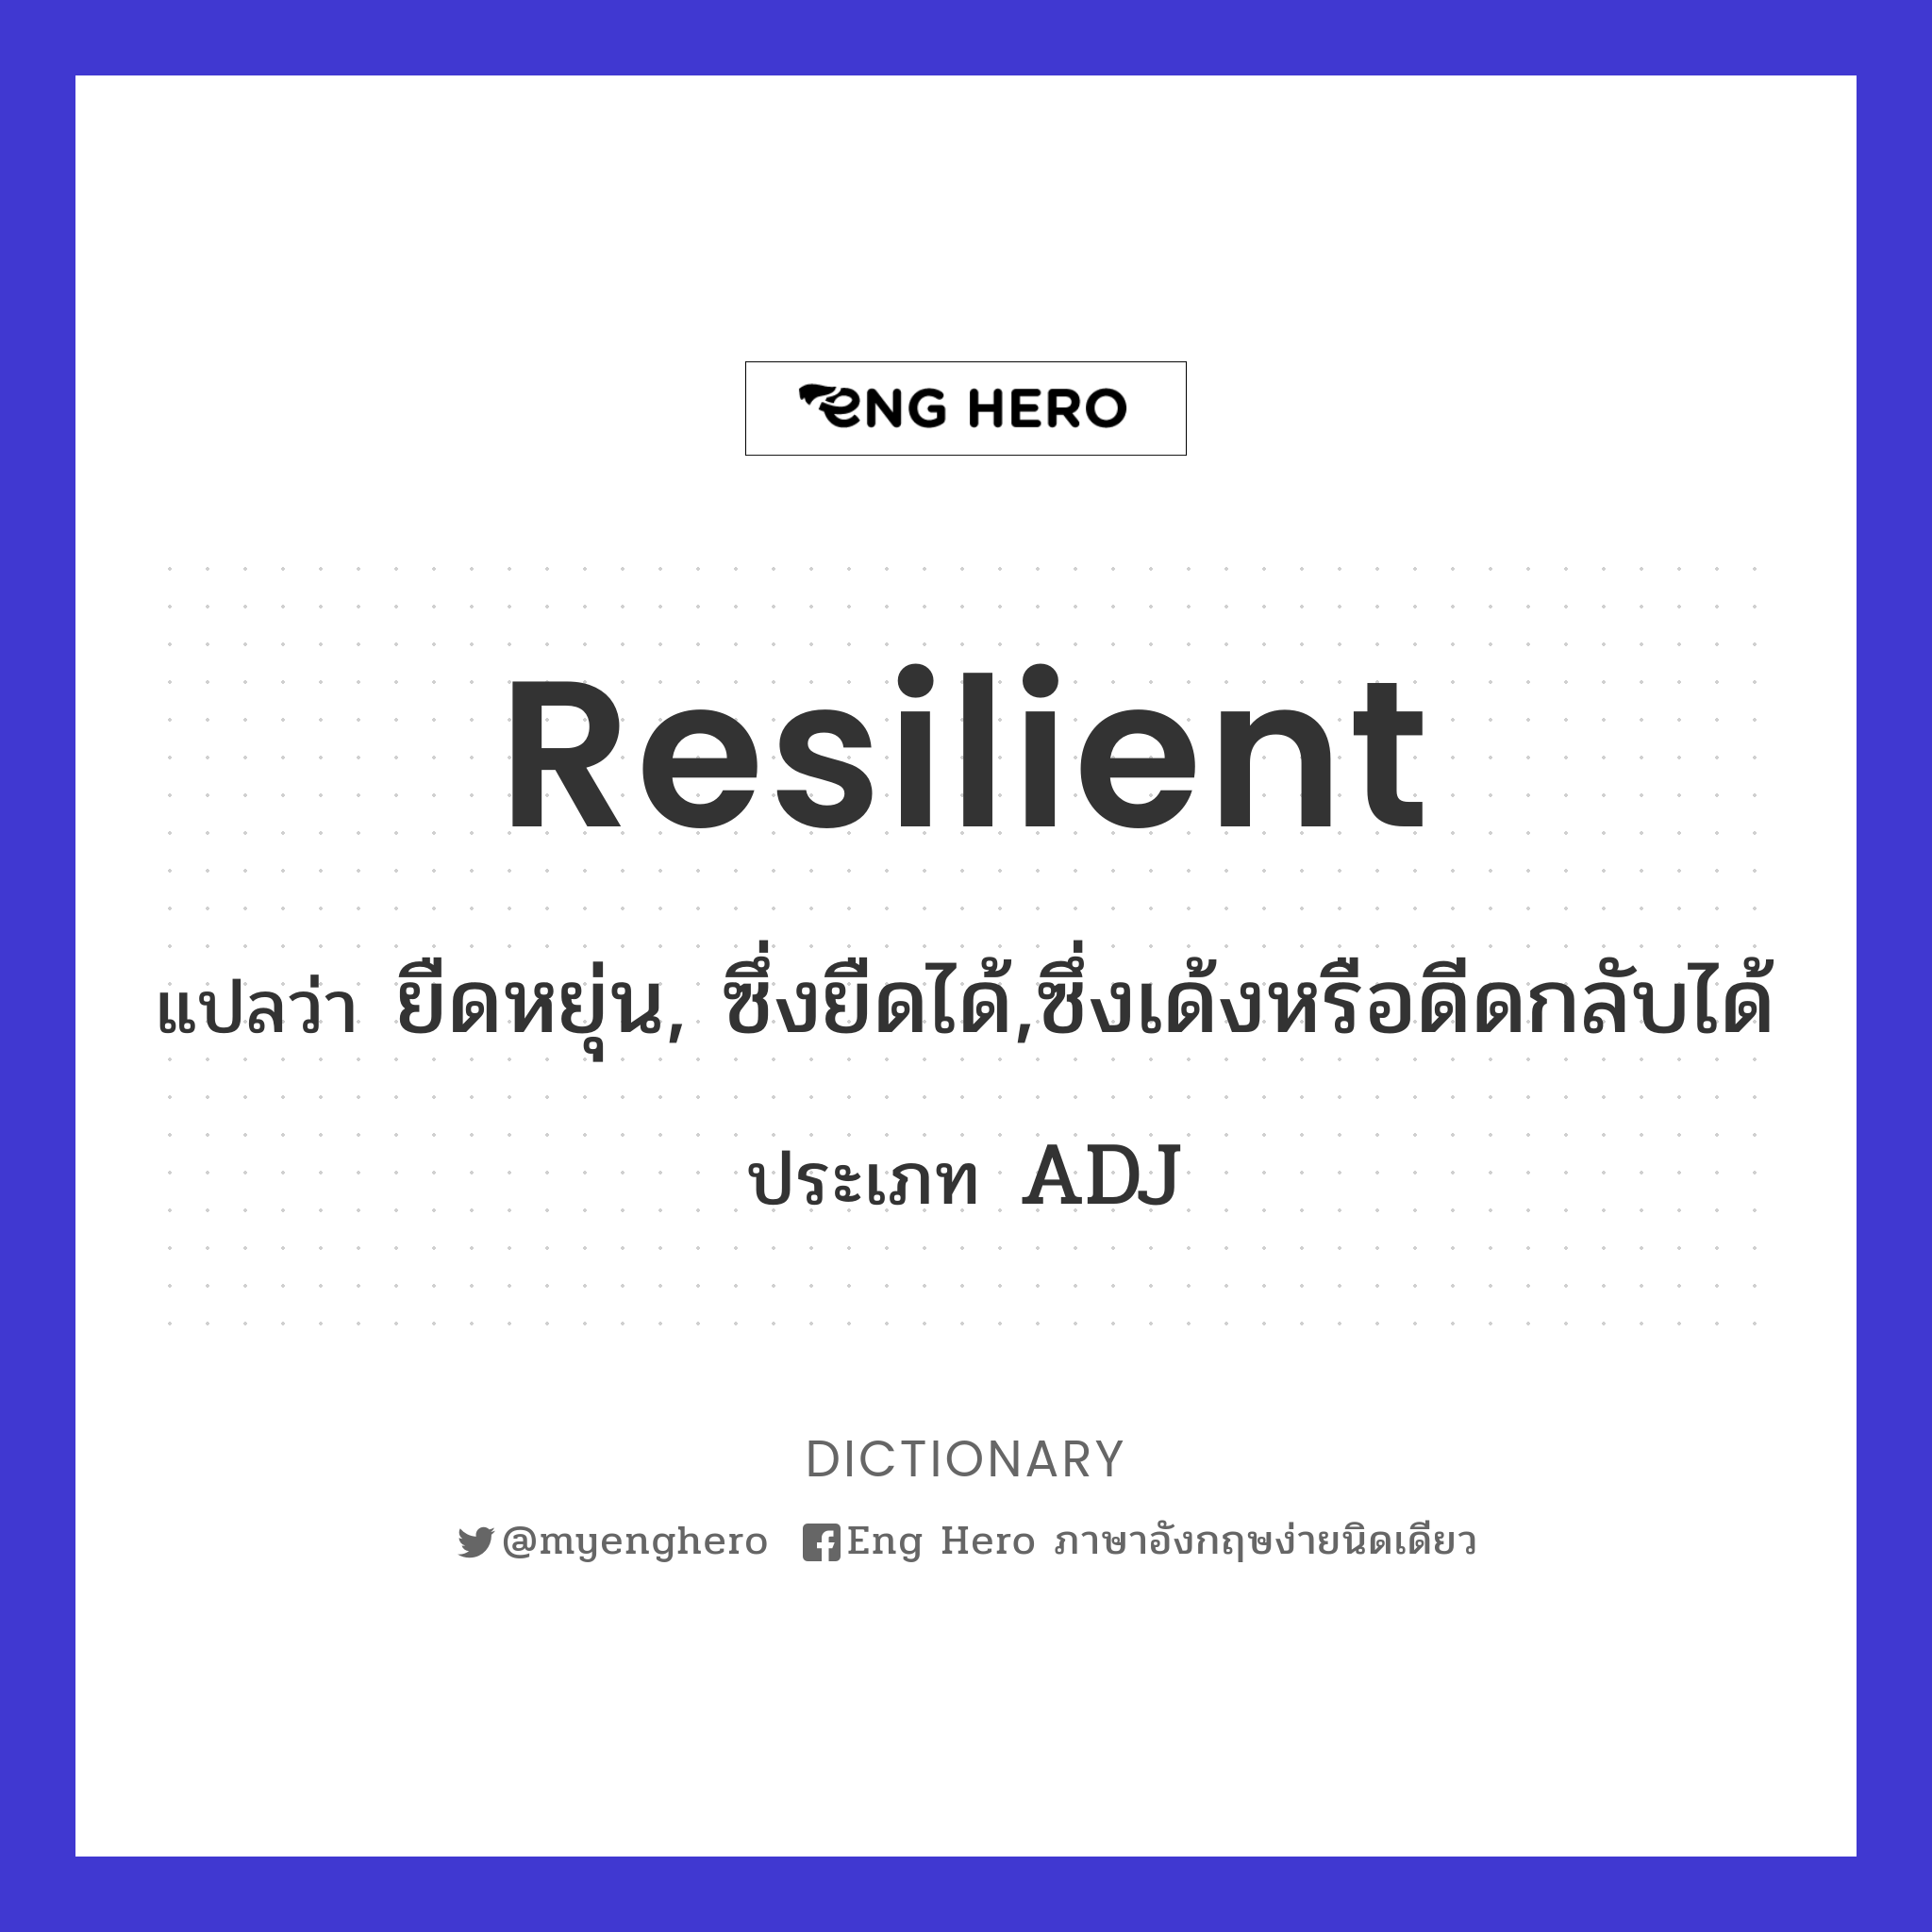 resilient